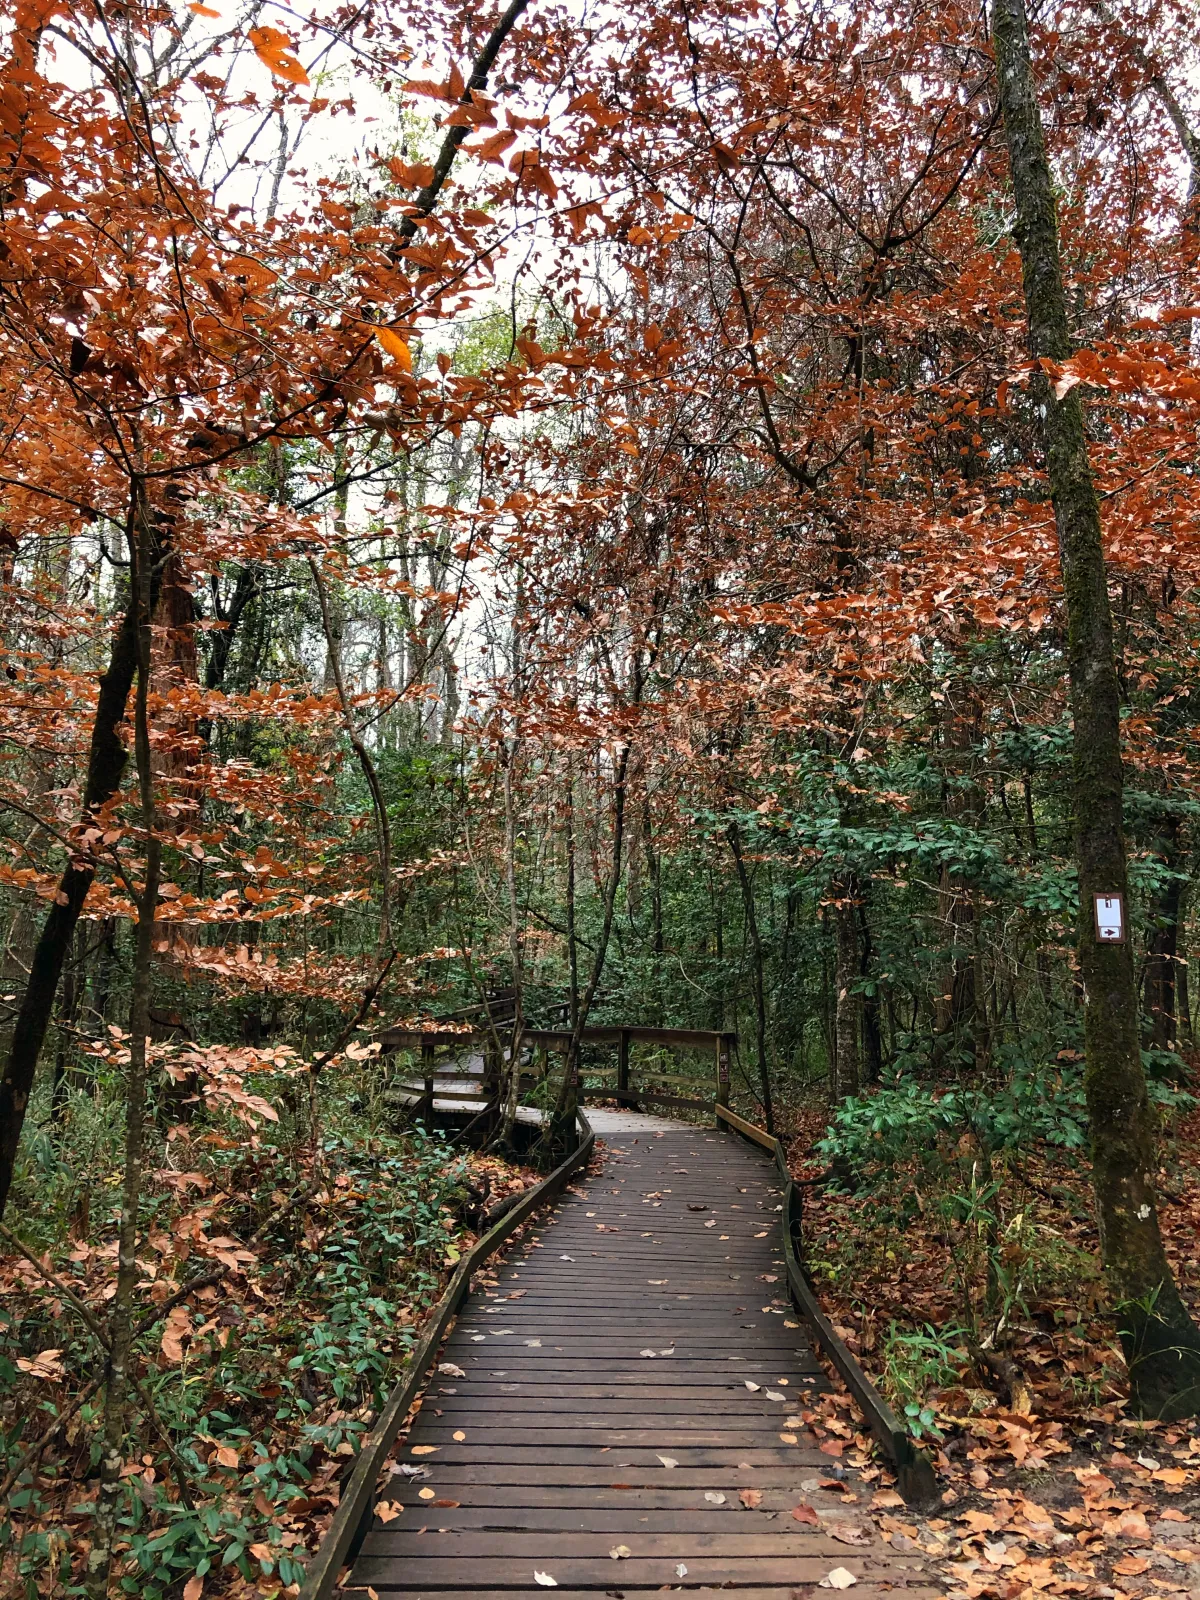 This is the Boardwalk Loop Trail during the autumn season.